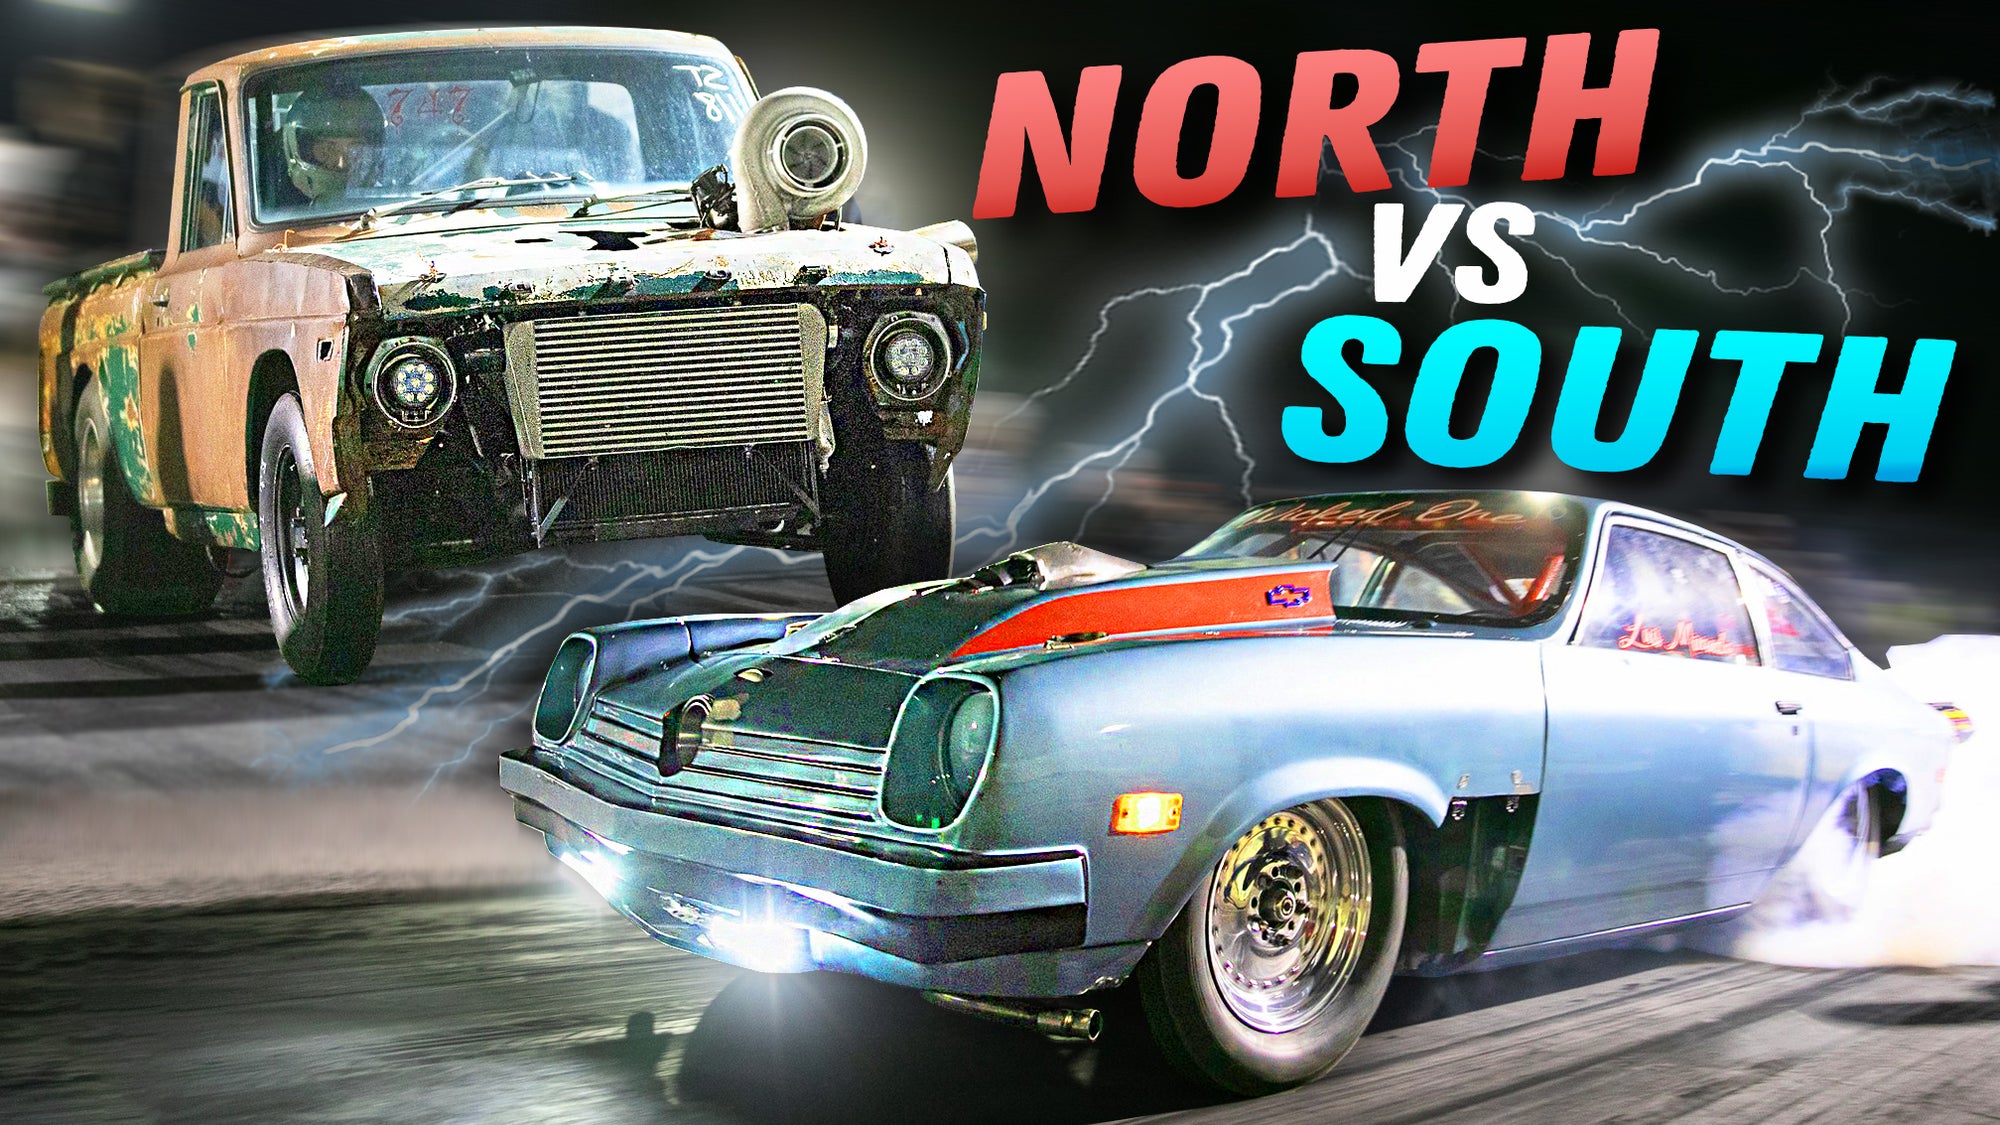 40 Cars BATTLE for $15,000! North vs South Small Tire Race!